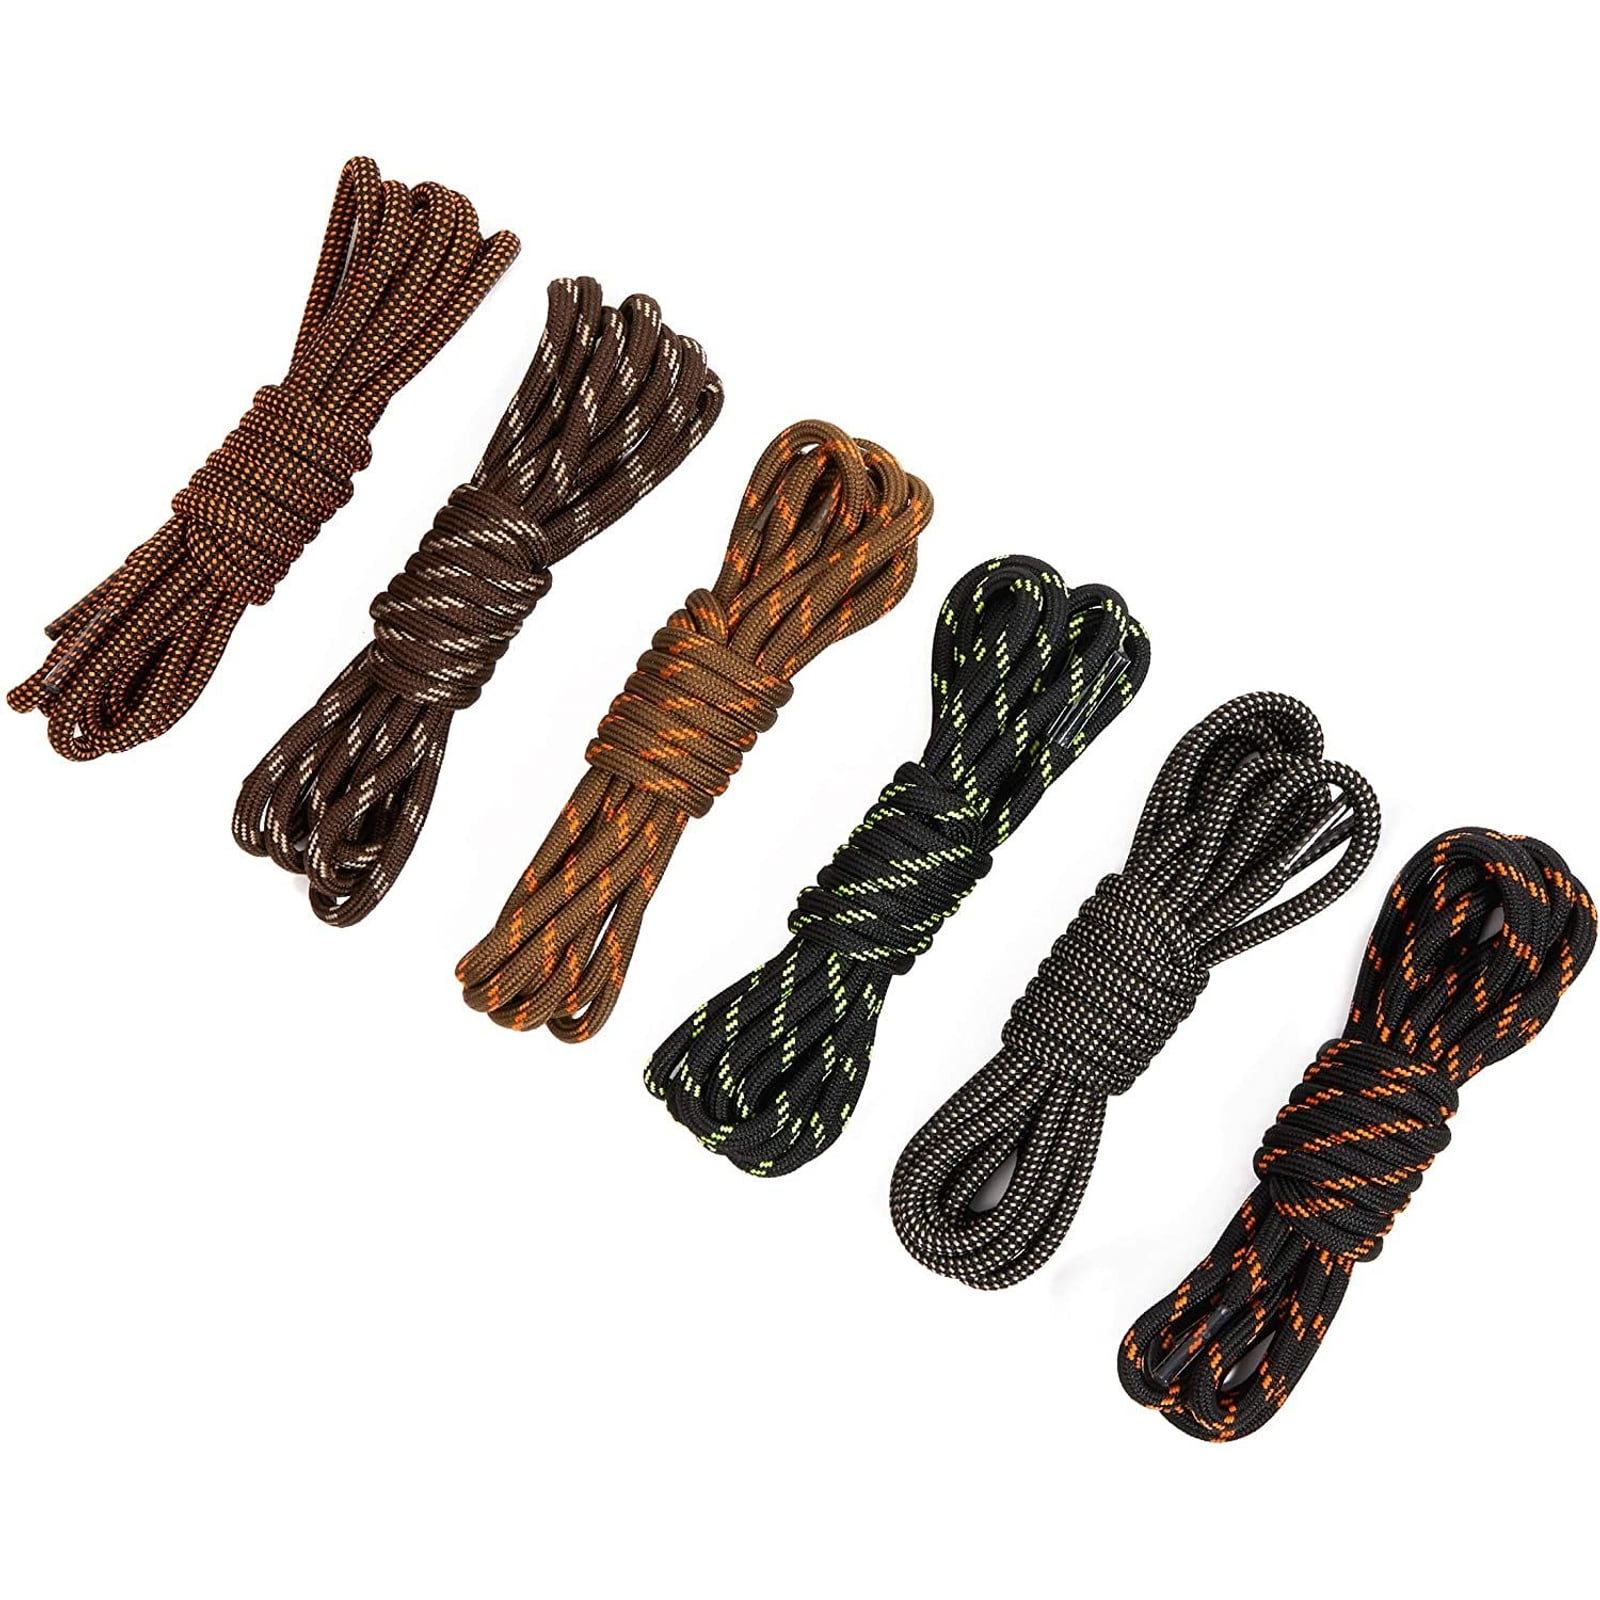 2 Pair each Lot of 6 Allary Boot Laces 54 Inch Black Boot Laces 